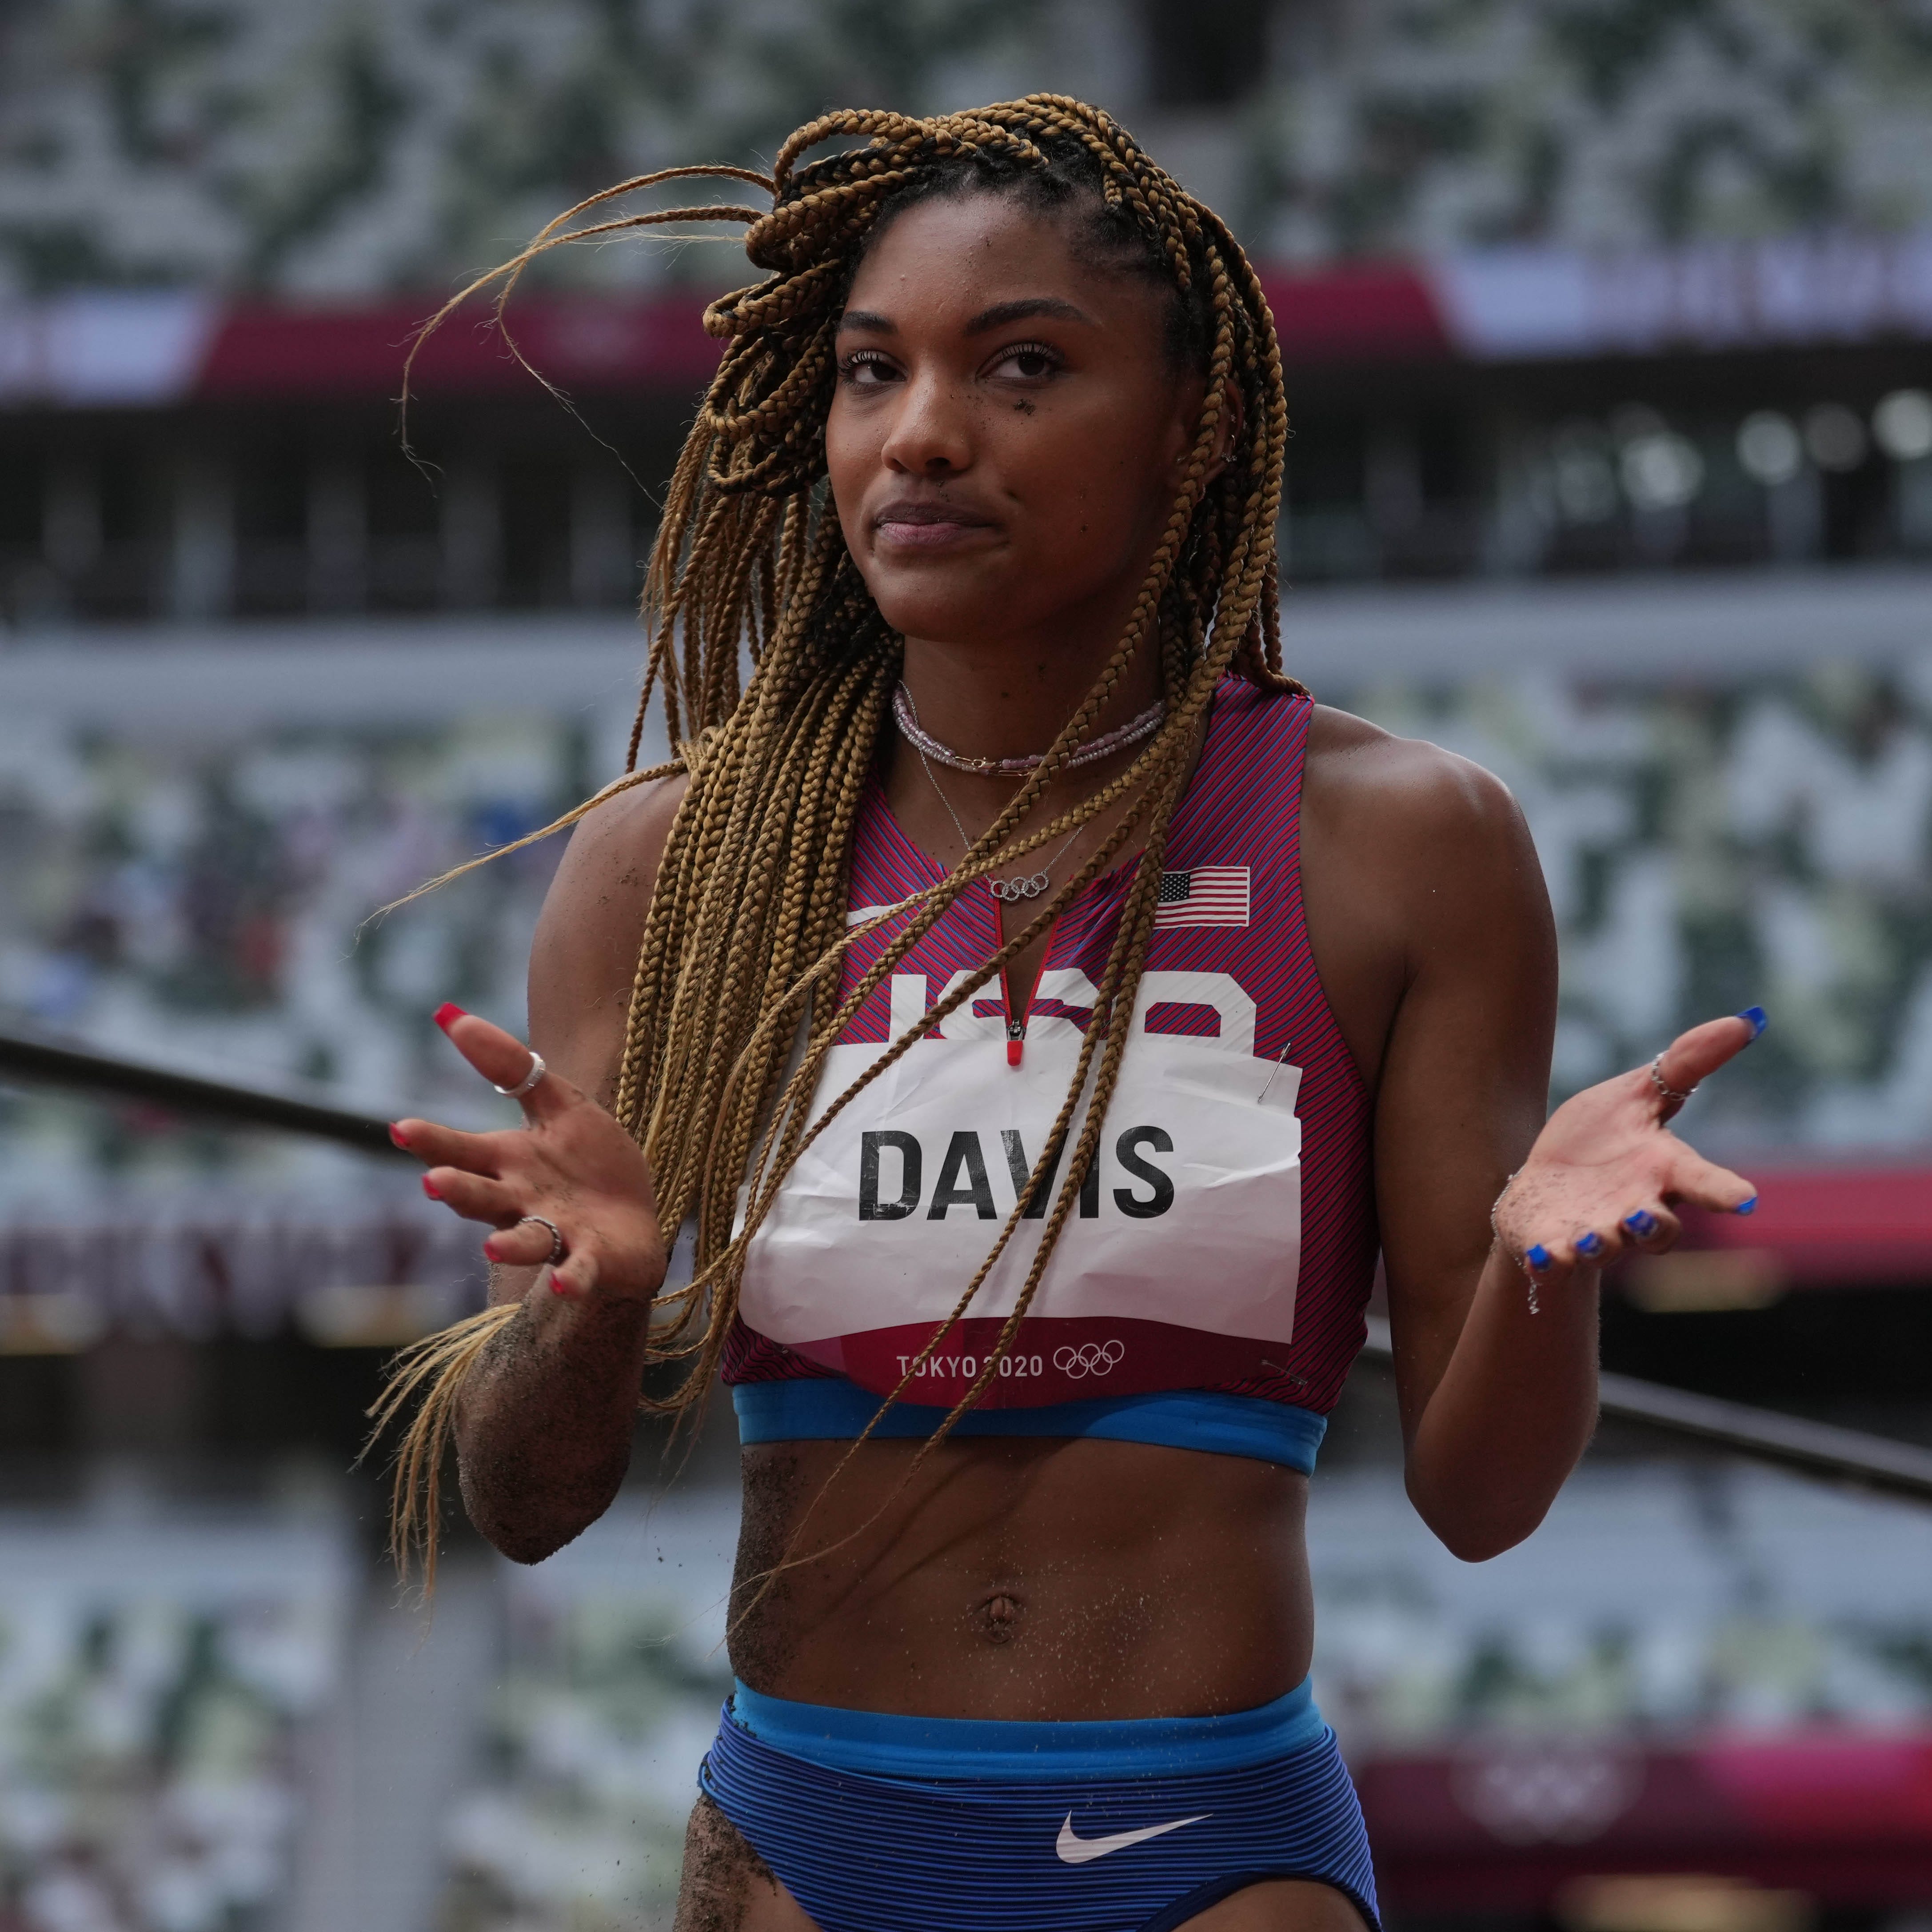 Tara Davis (USA) reacts in the women's long jump final during the Tokyo 2020 Summer Olympic Games at Olympic Stadium on Aug 3, 2021.